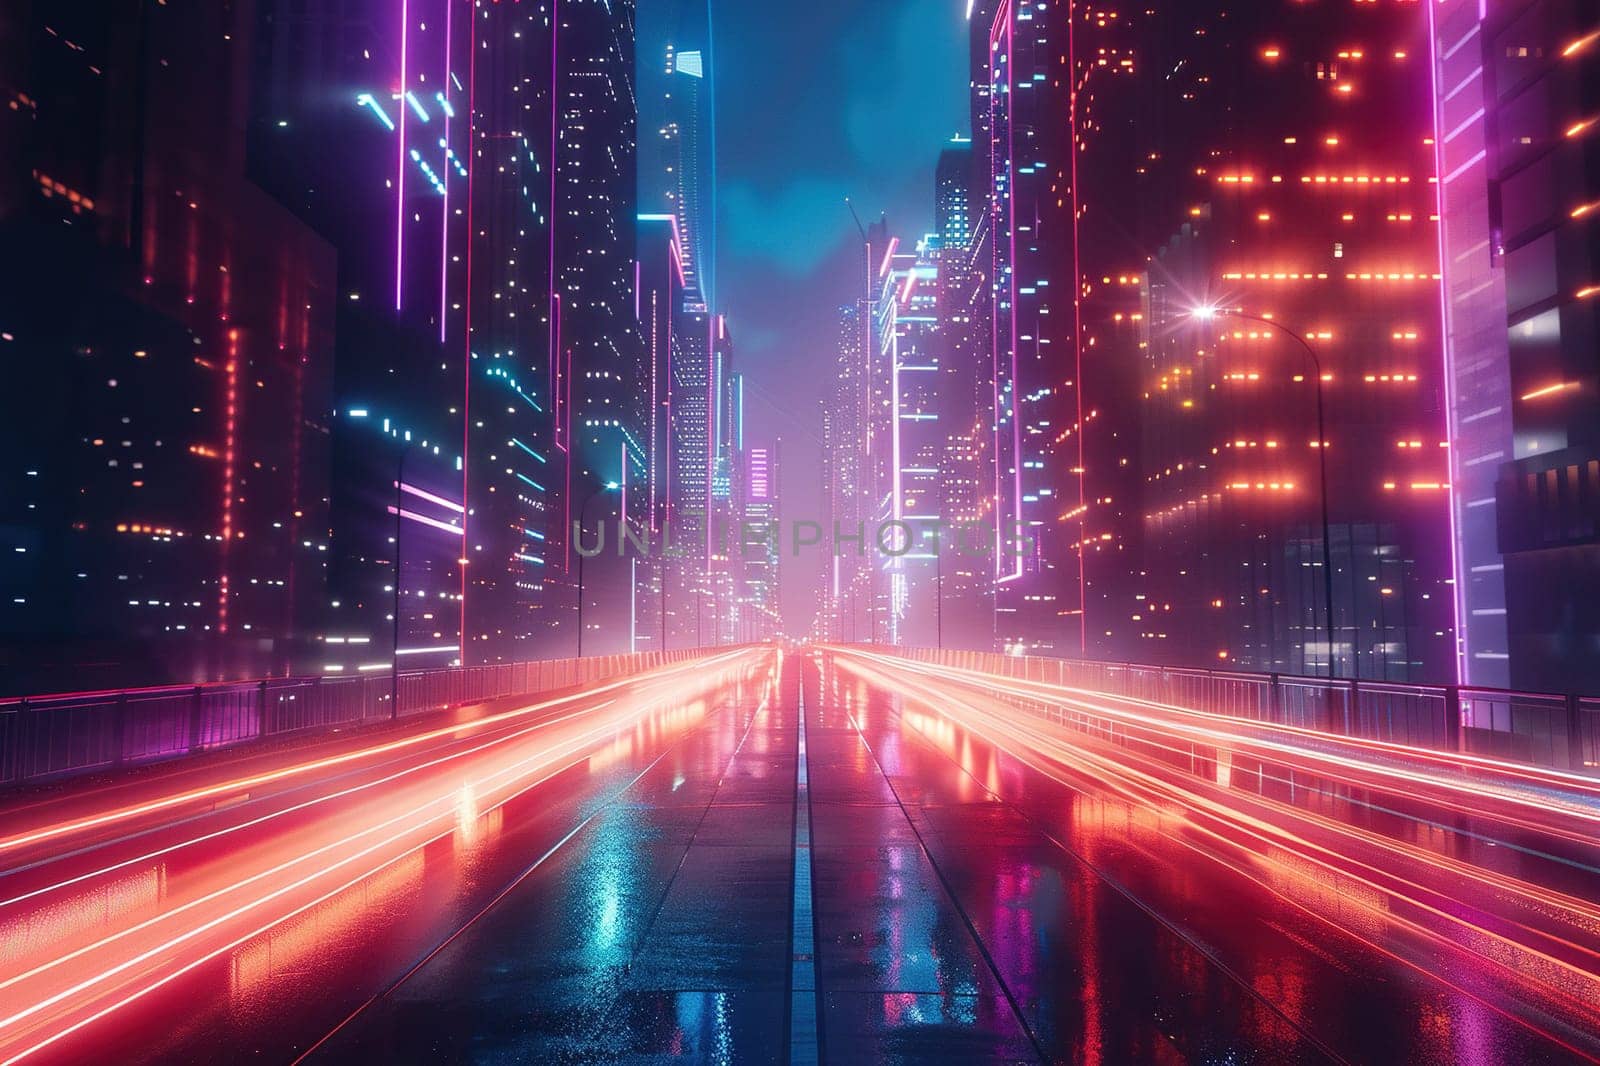 An image of a night city in a neon glow with skyscrapers and a road. Generated by artificial intelligence by Vovmar